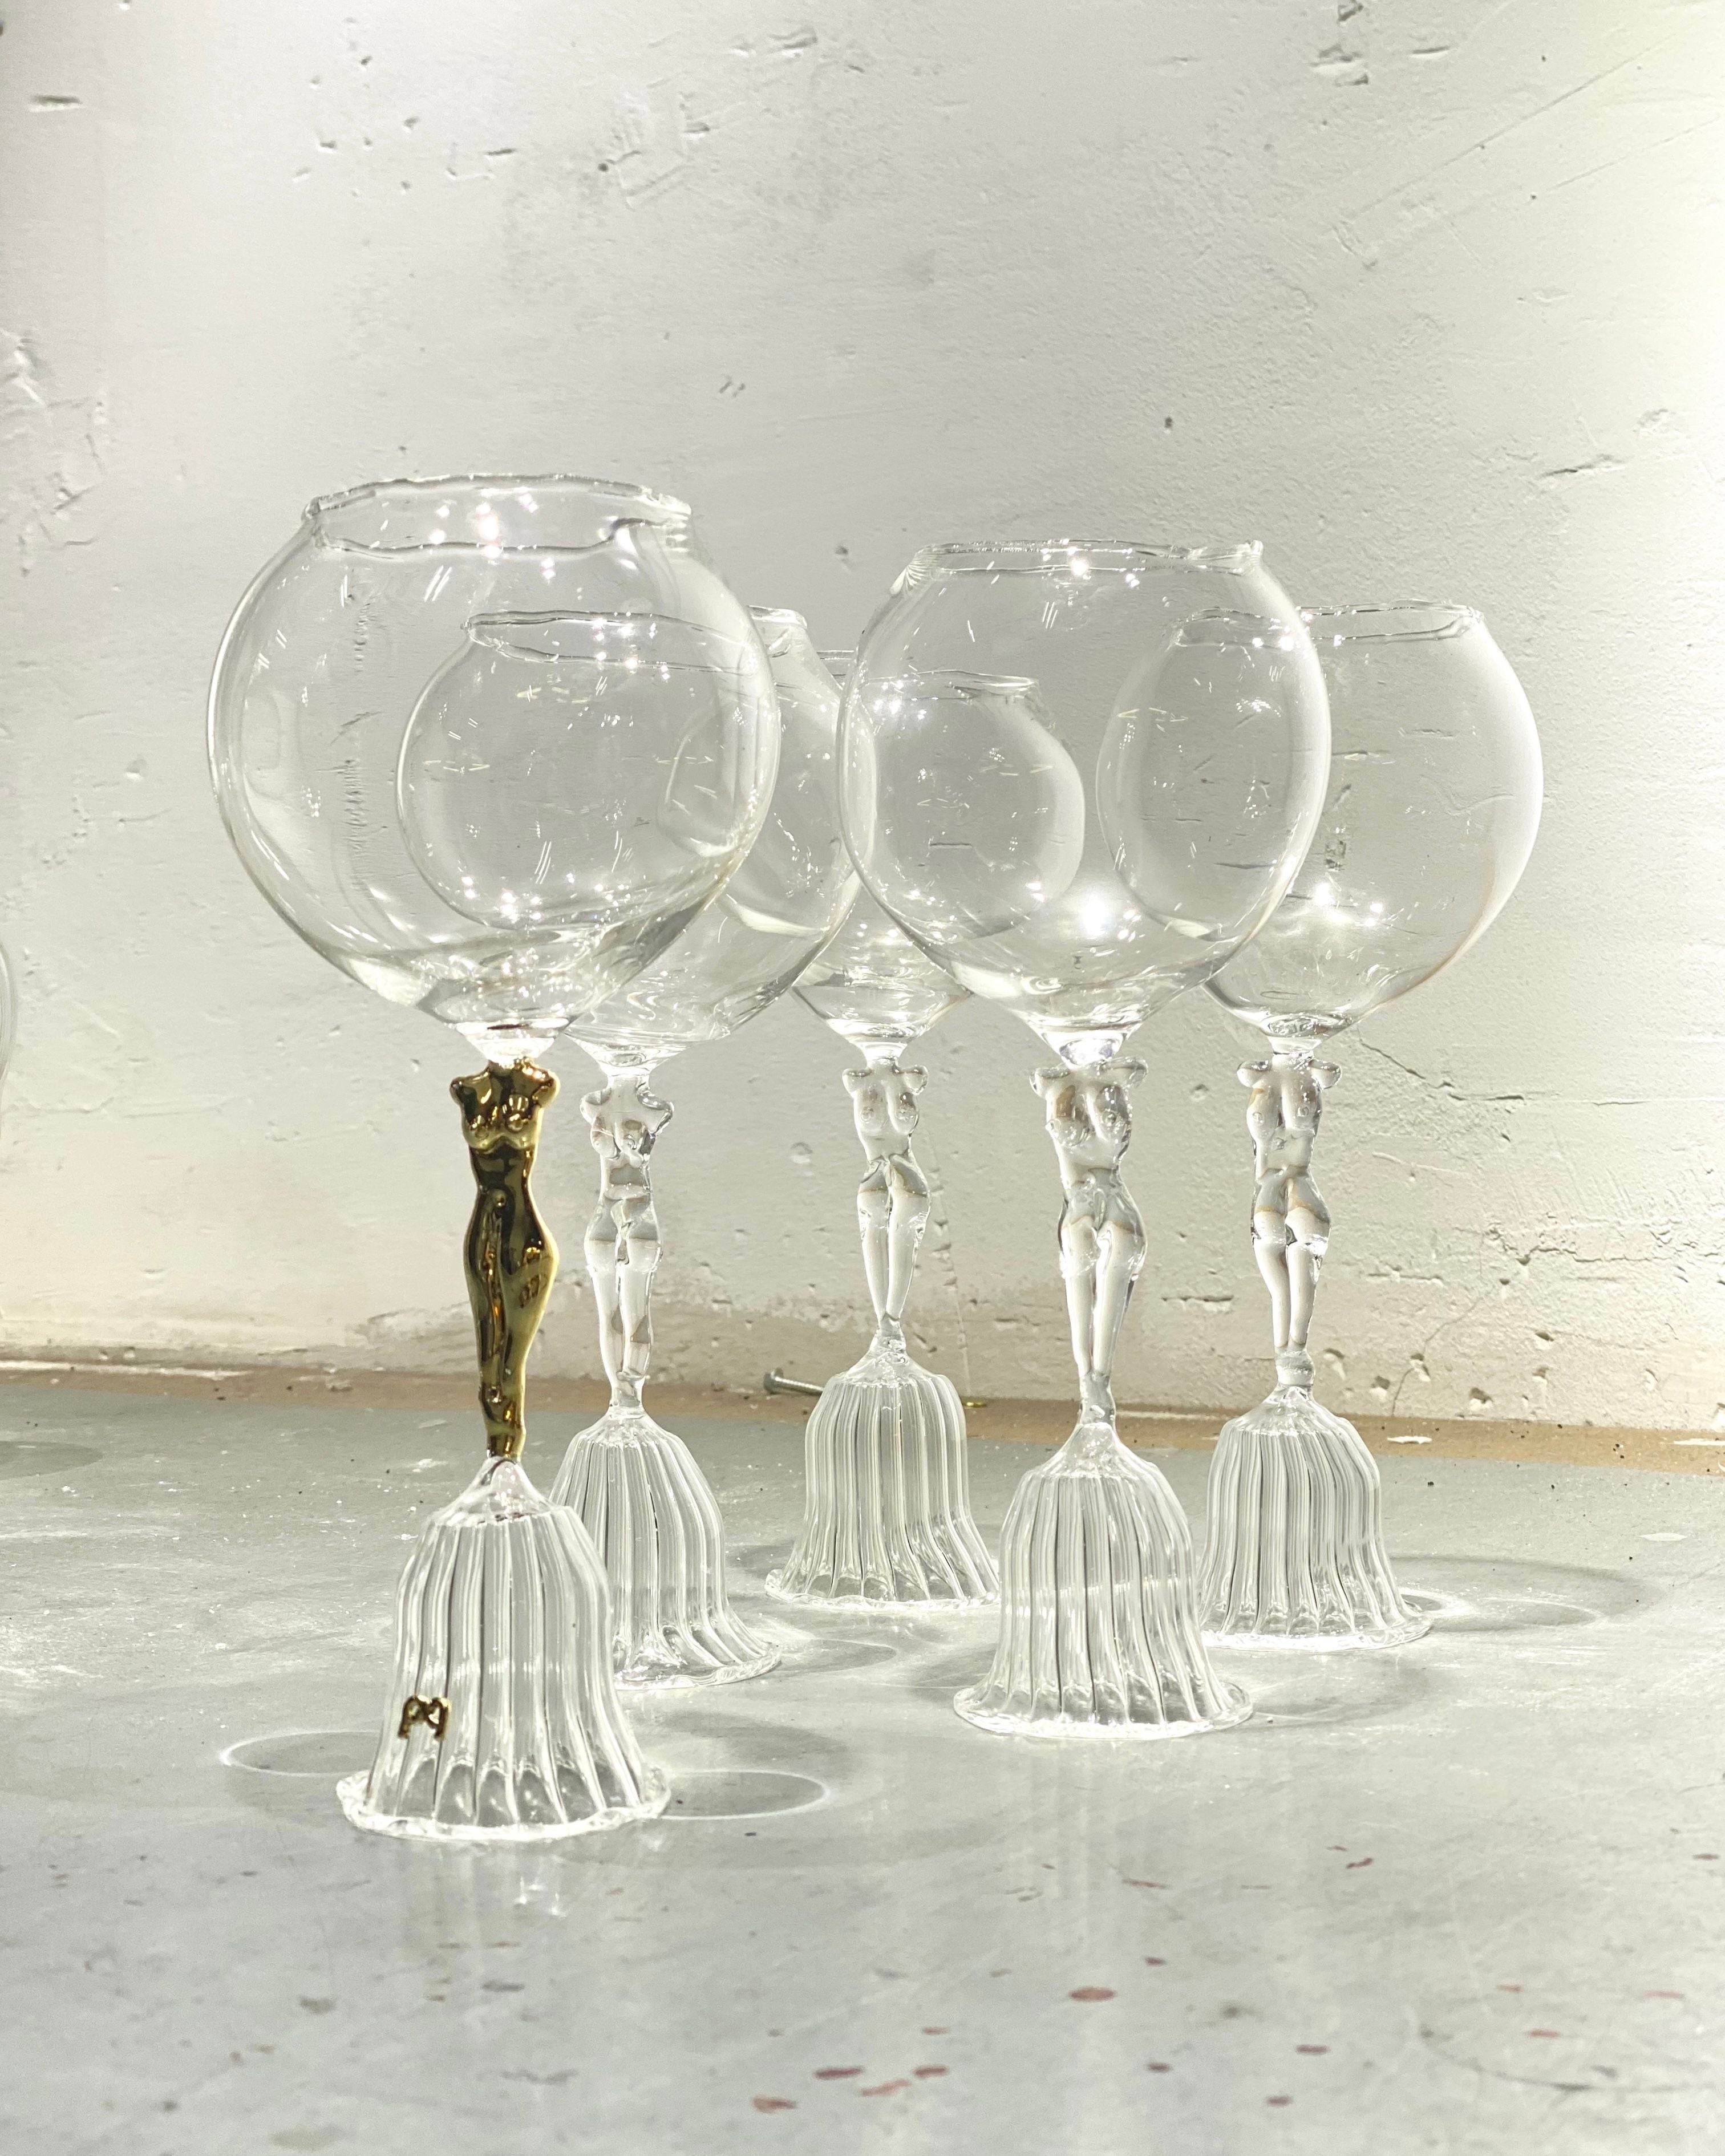 Two elegant handcrafted glass wine glasses in a pair, perfect for enjoying your favorite wine